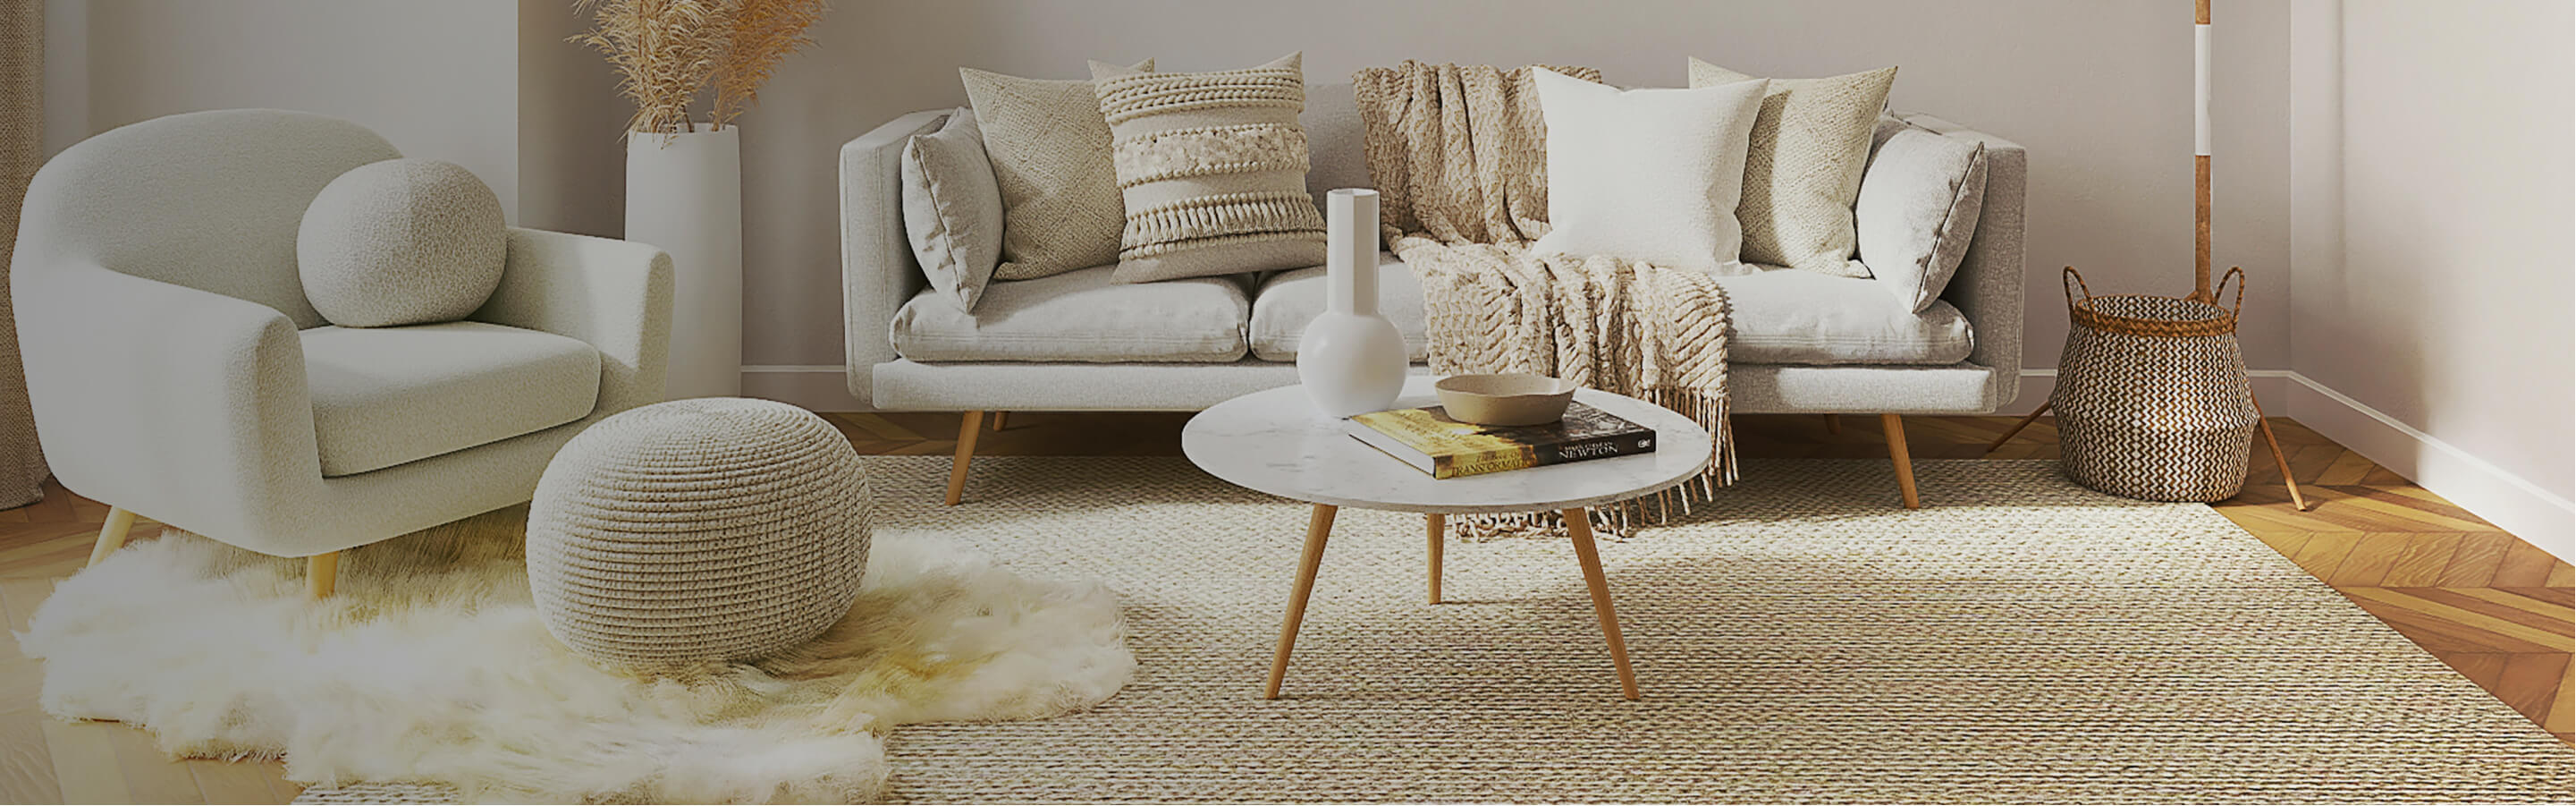 neutral beige area rug in living space with cream tone furniture